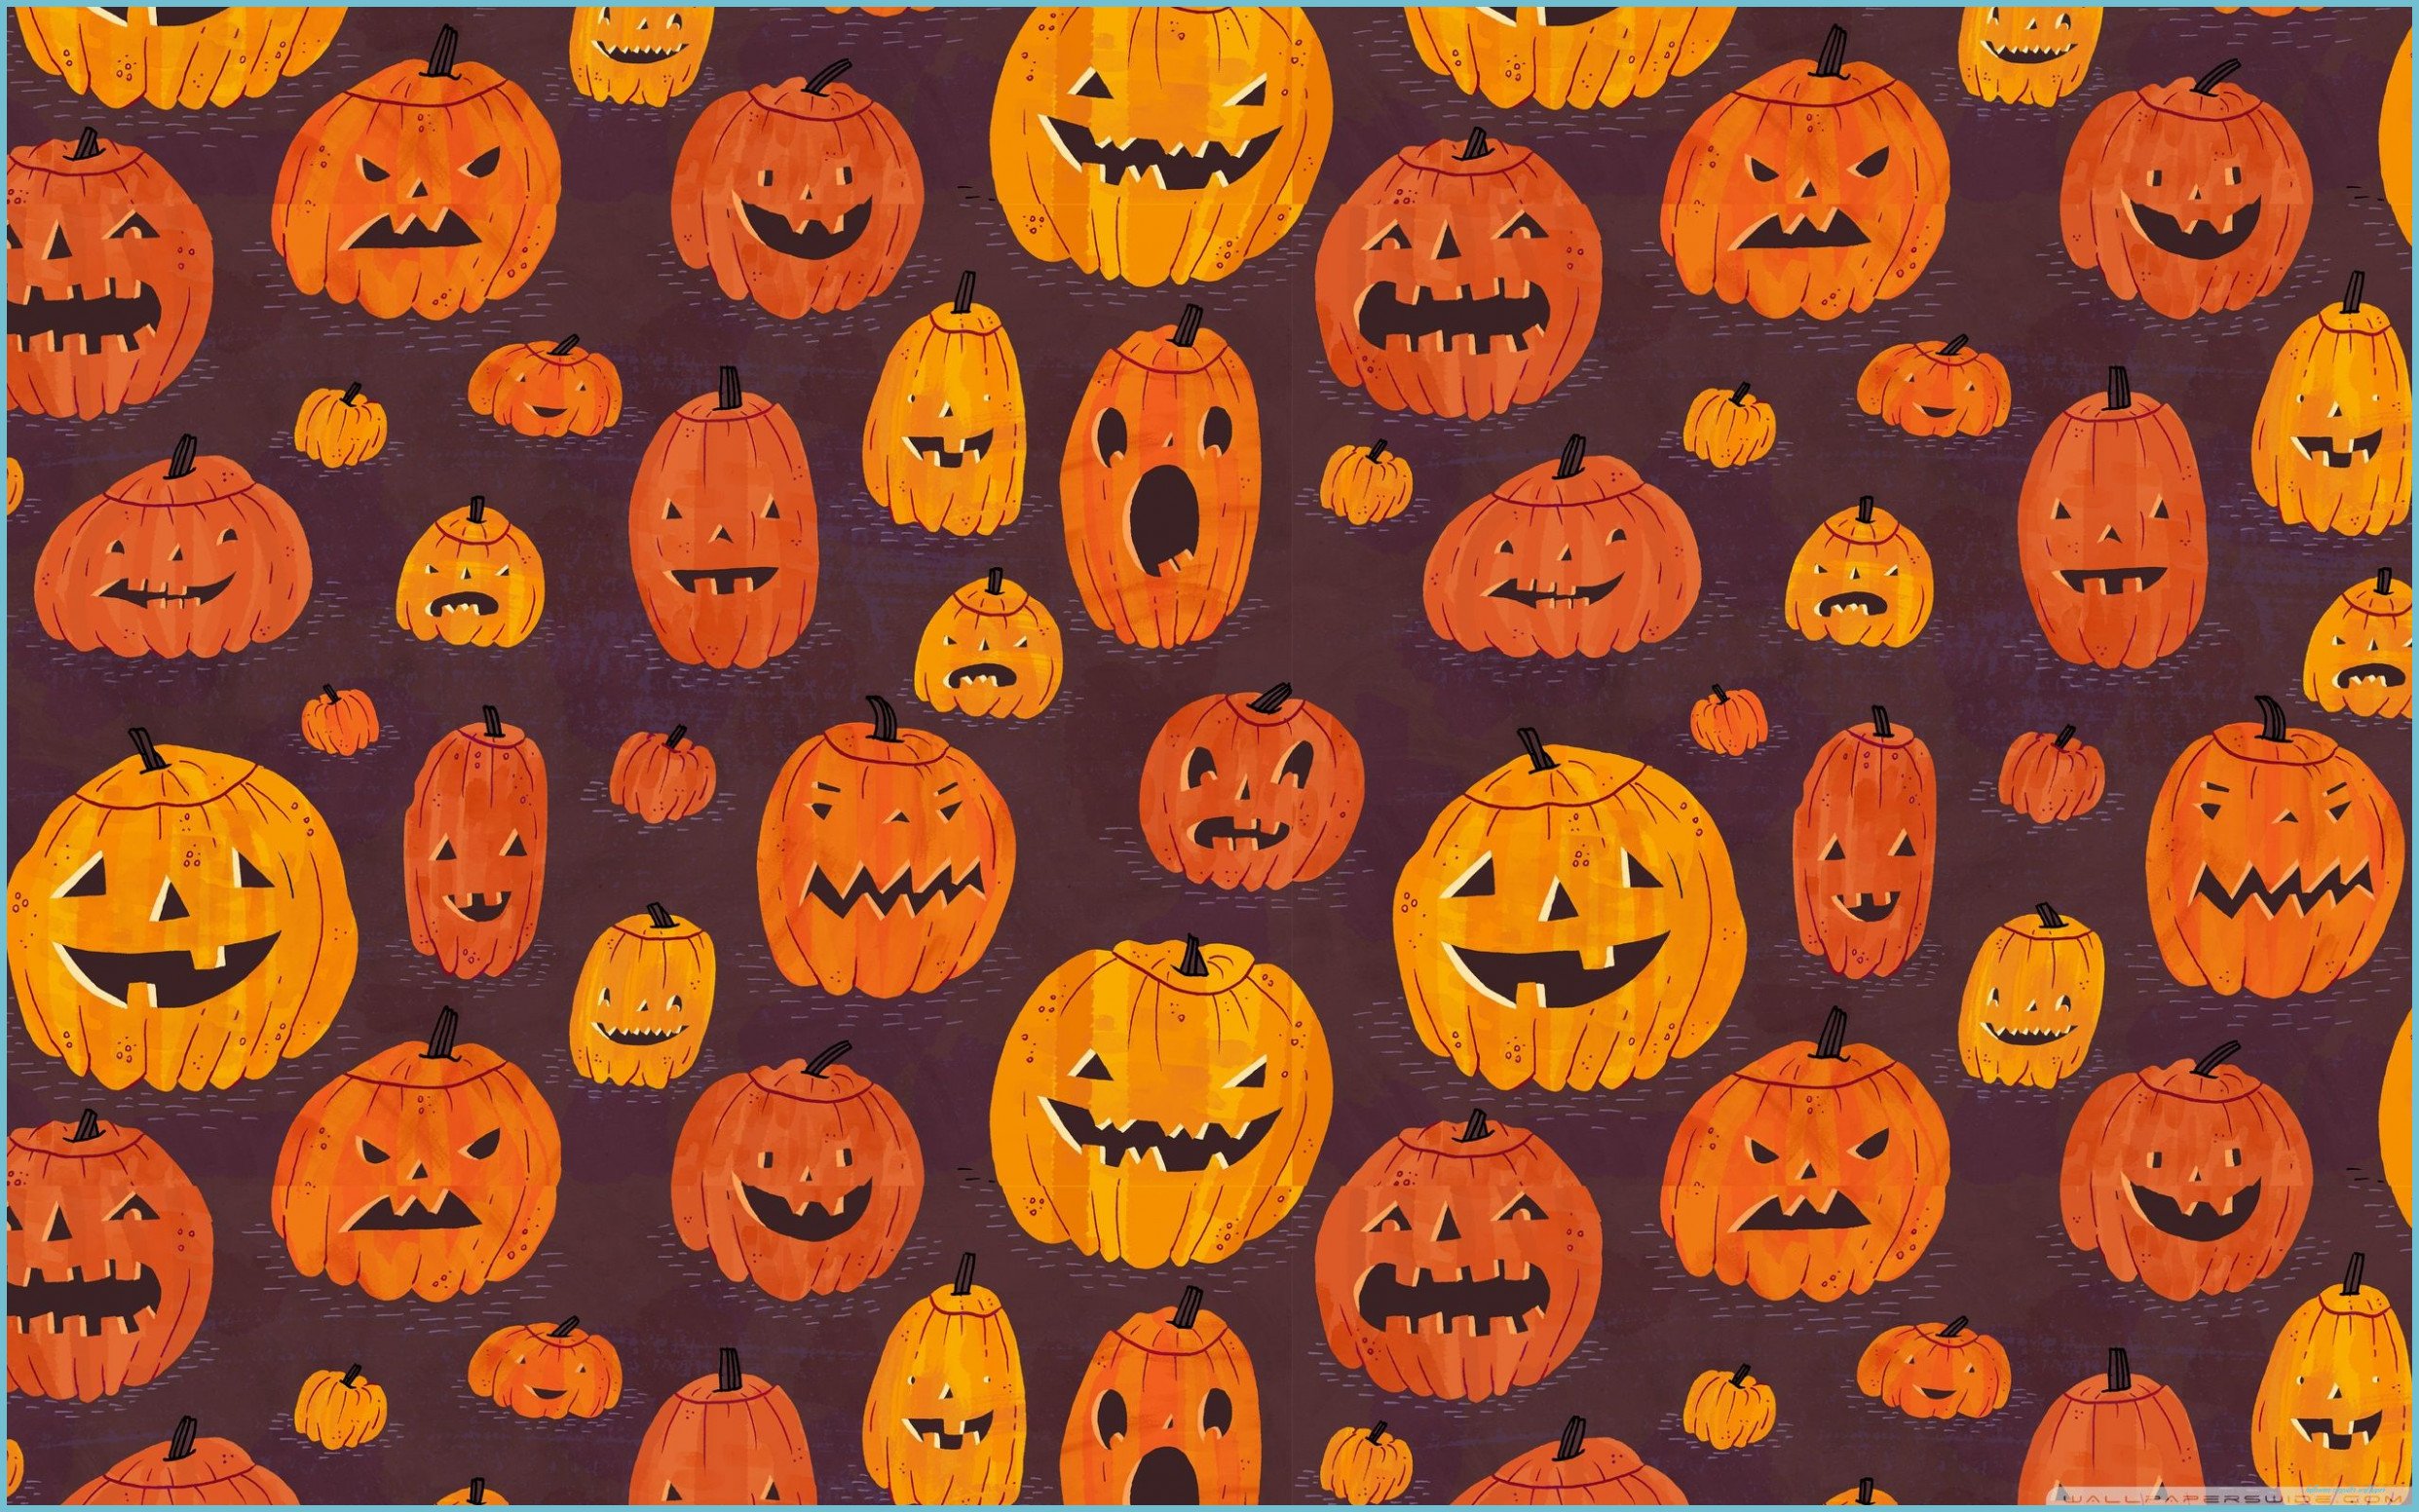 Seven Small But Important Things To Observe In Halloween Computer Wallpaper. Halloween Computer Wallpaper